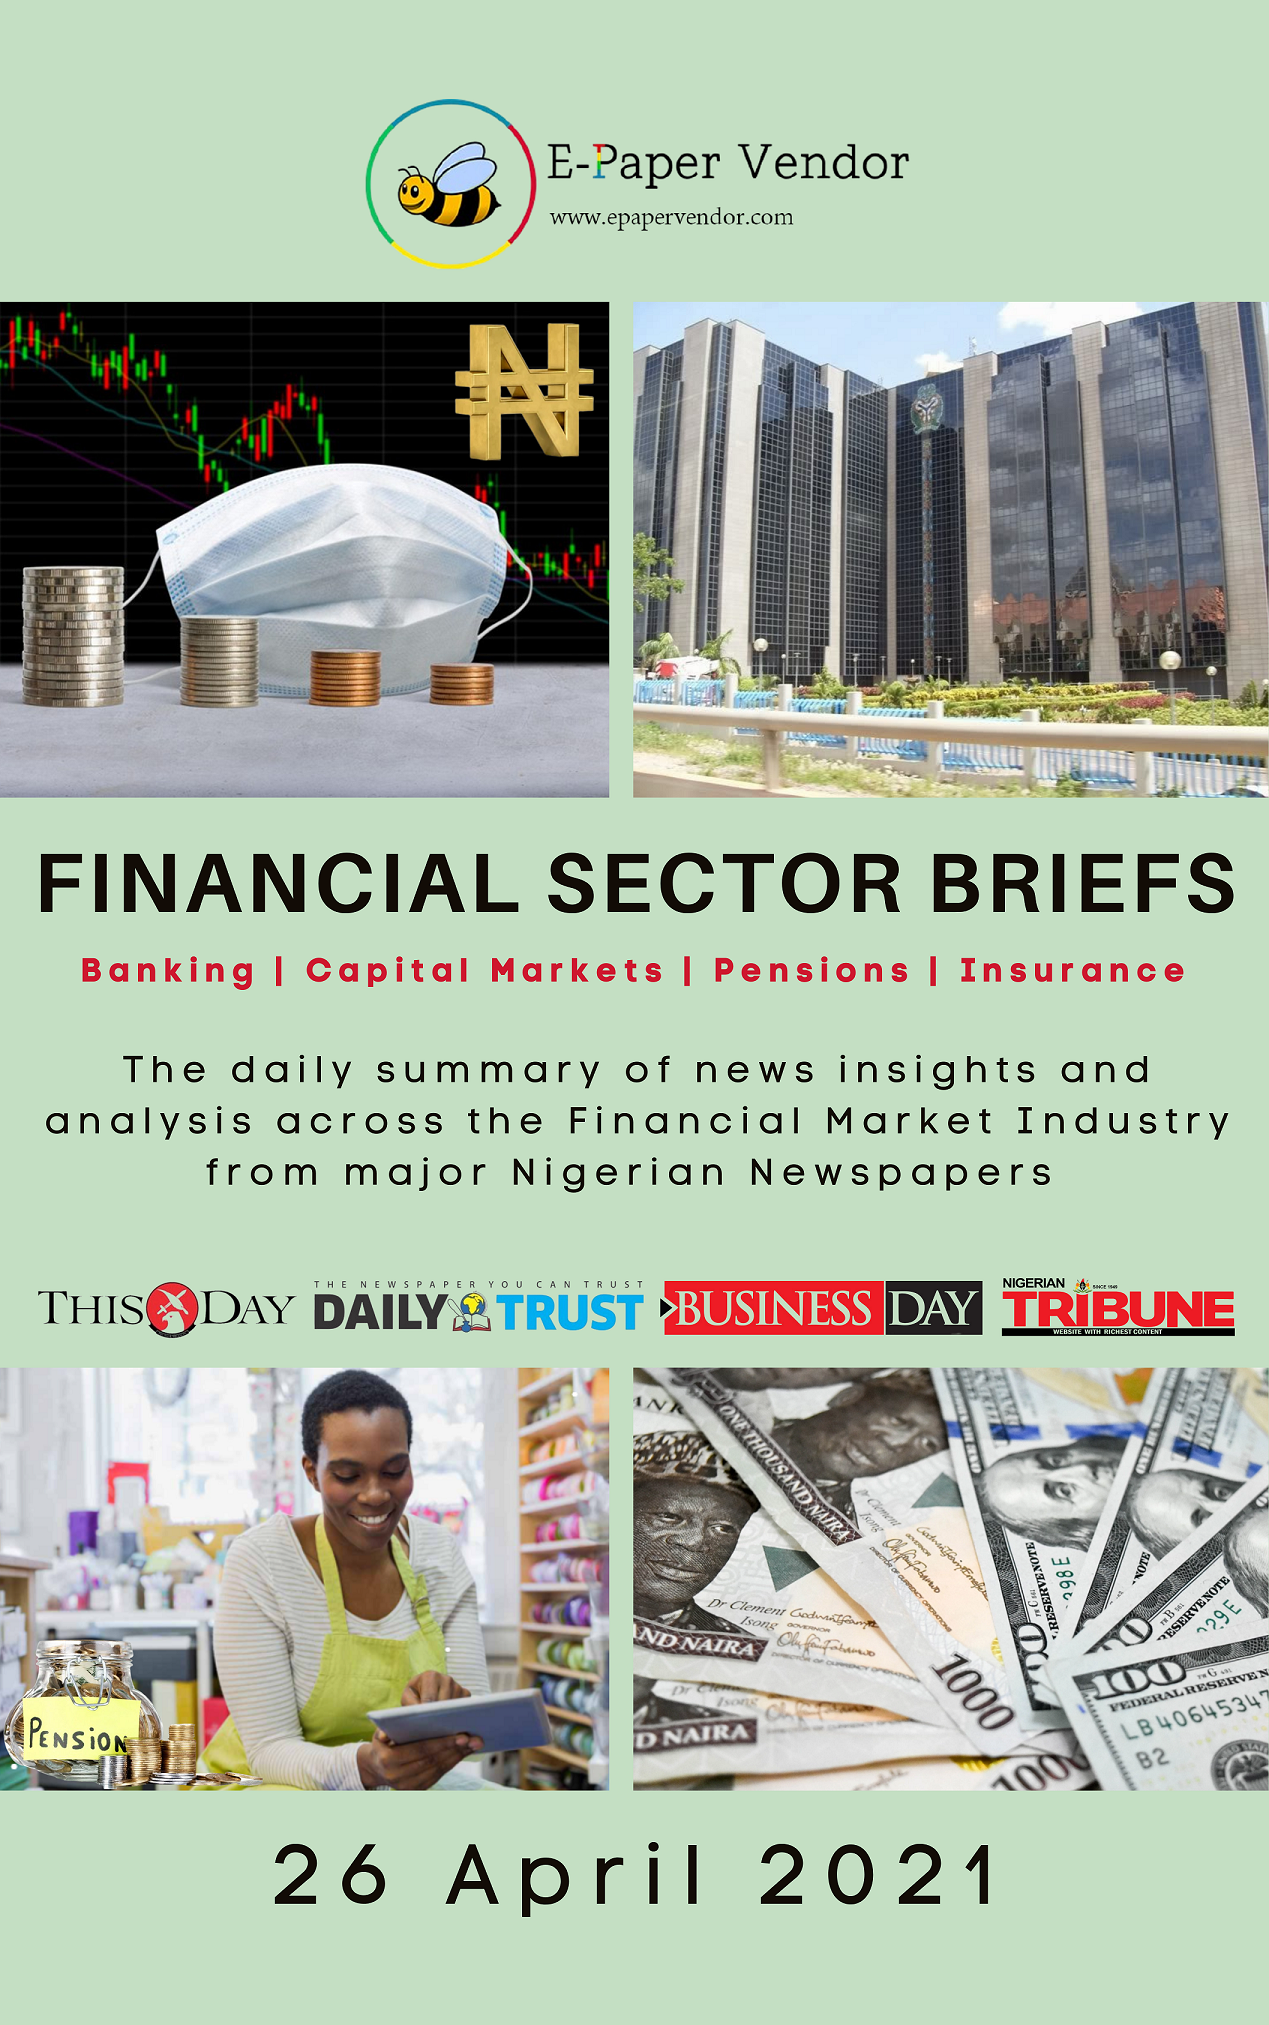 FINANCIAL SECTOR SUMMARY (26 APRIL 2021)